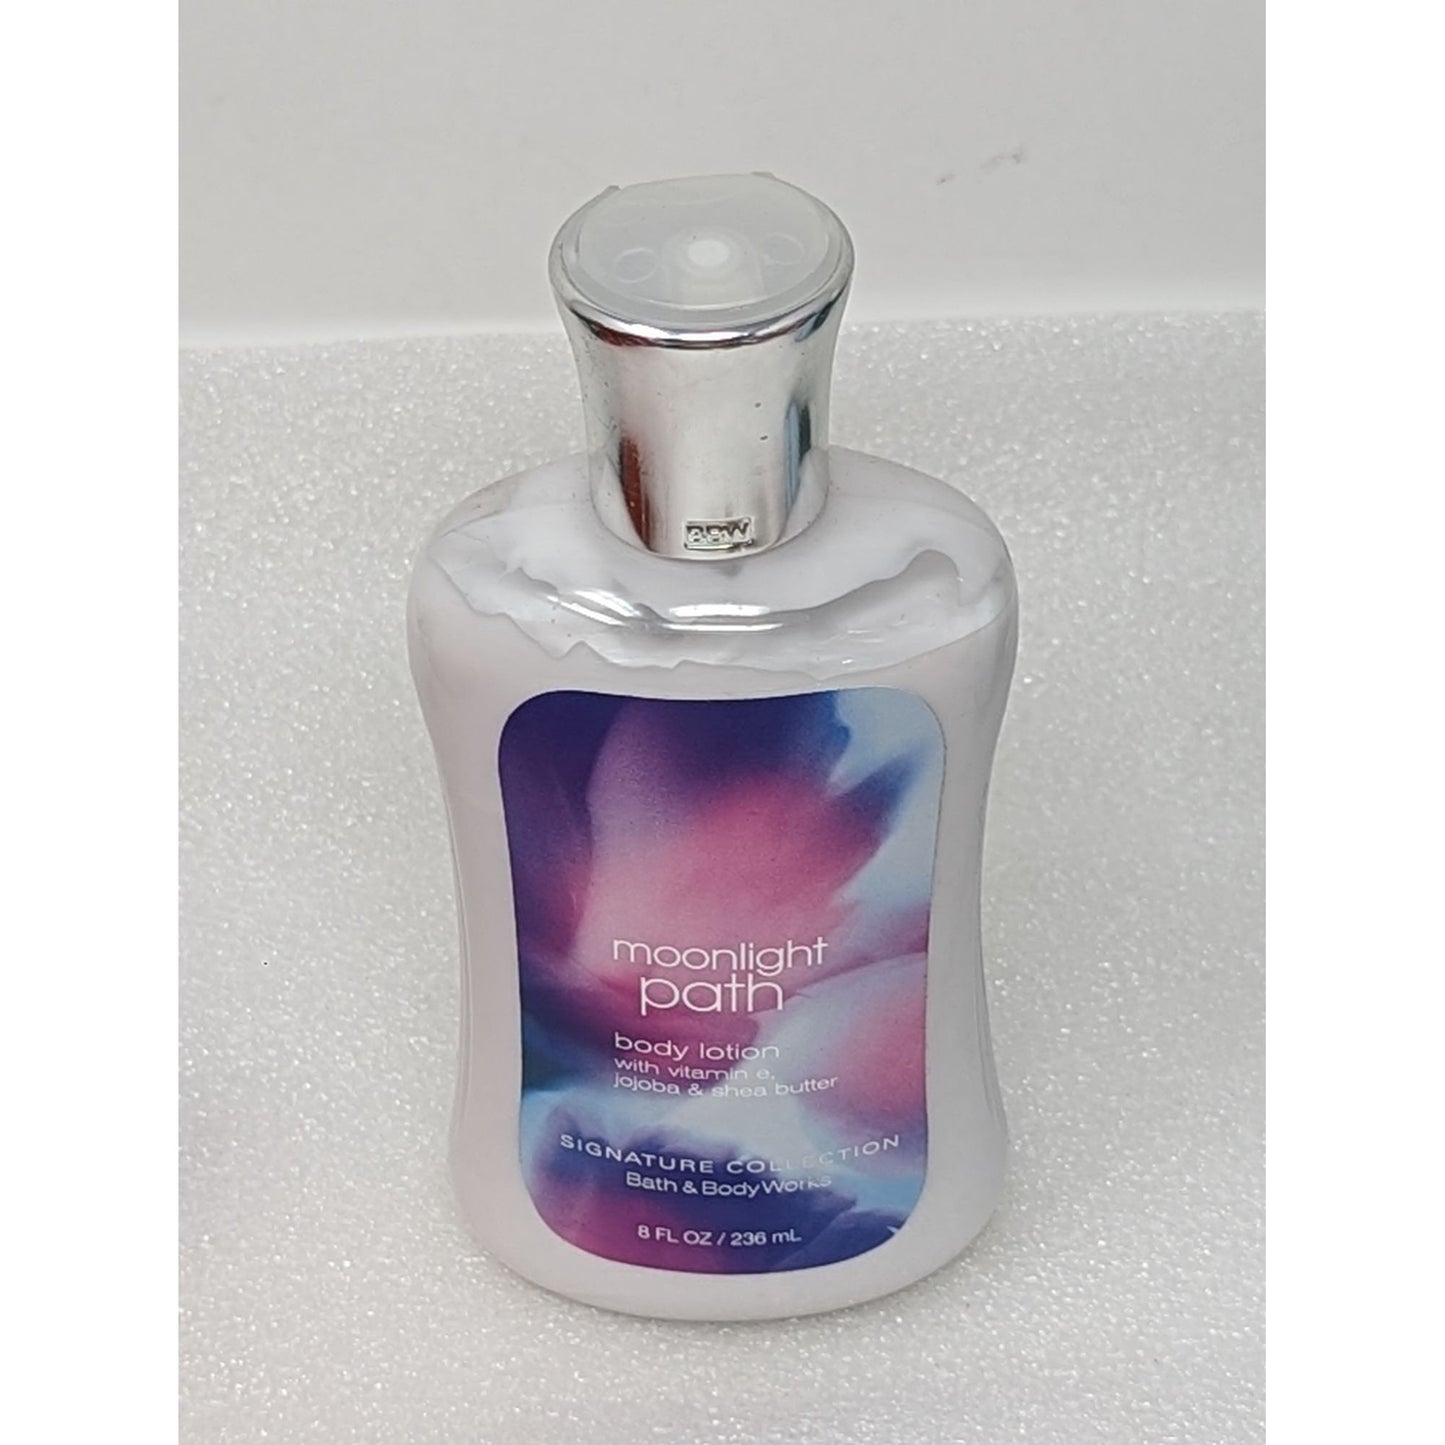 Bath & Body Works Moonlight Path Signature Collection Body Lotion 8 oz